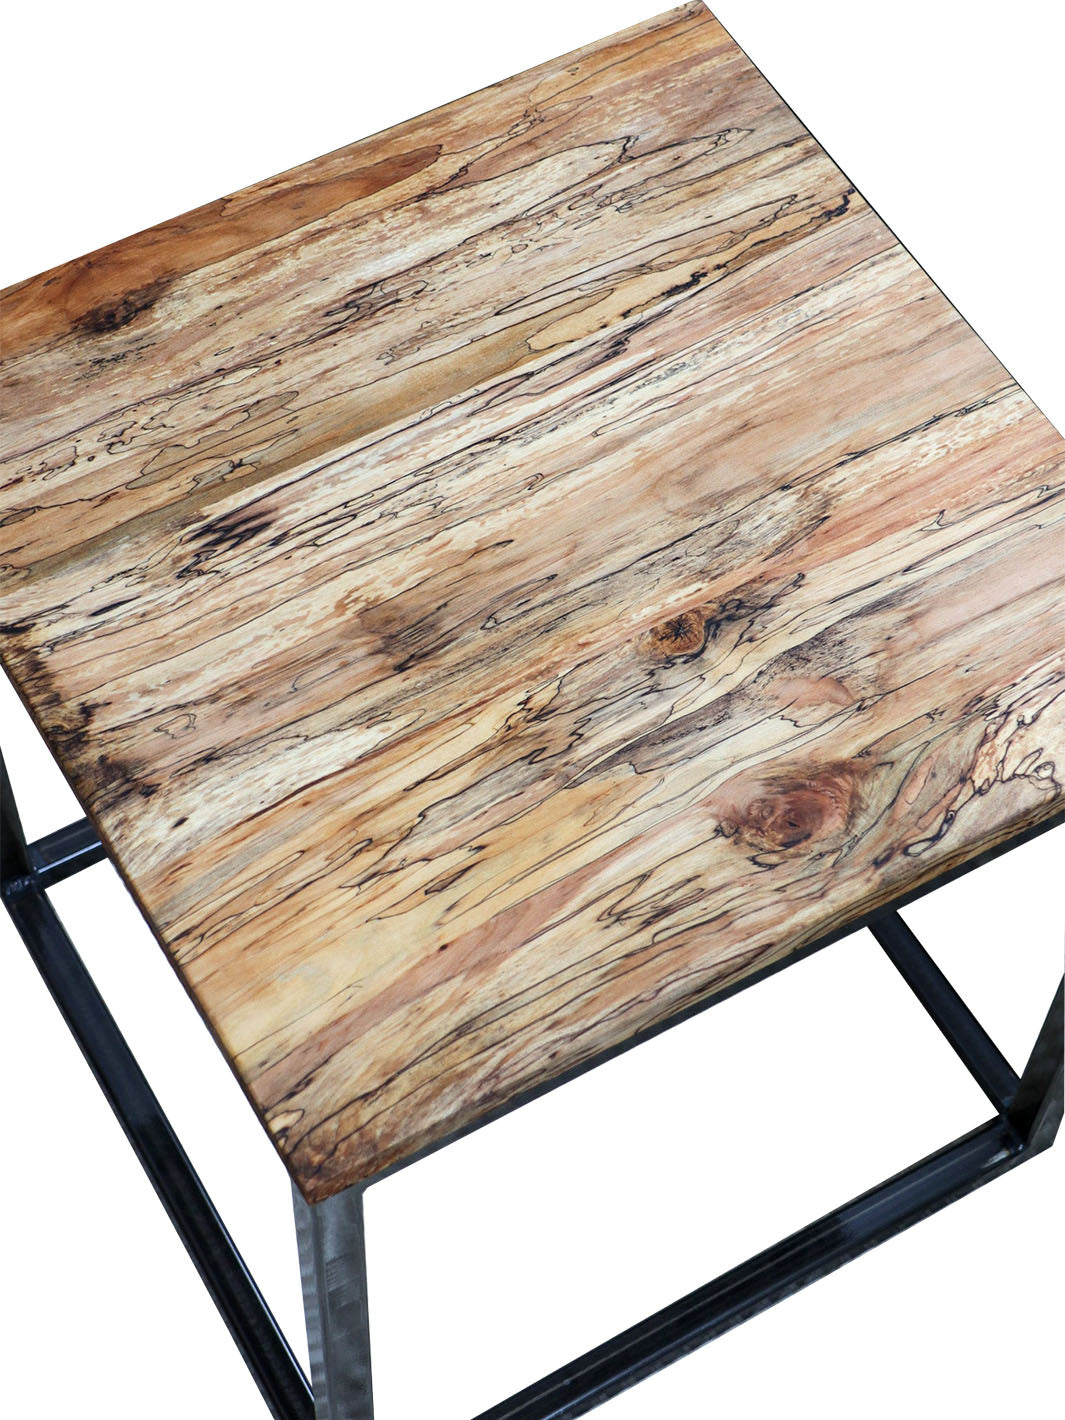 Spalted Maple Cube 18" Coffee Table, Side Table, Solid Wood Table Earthly Comfort Side Tables 2111-1